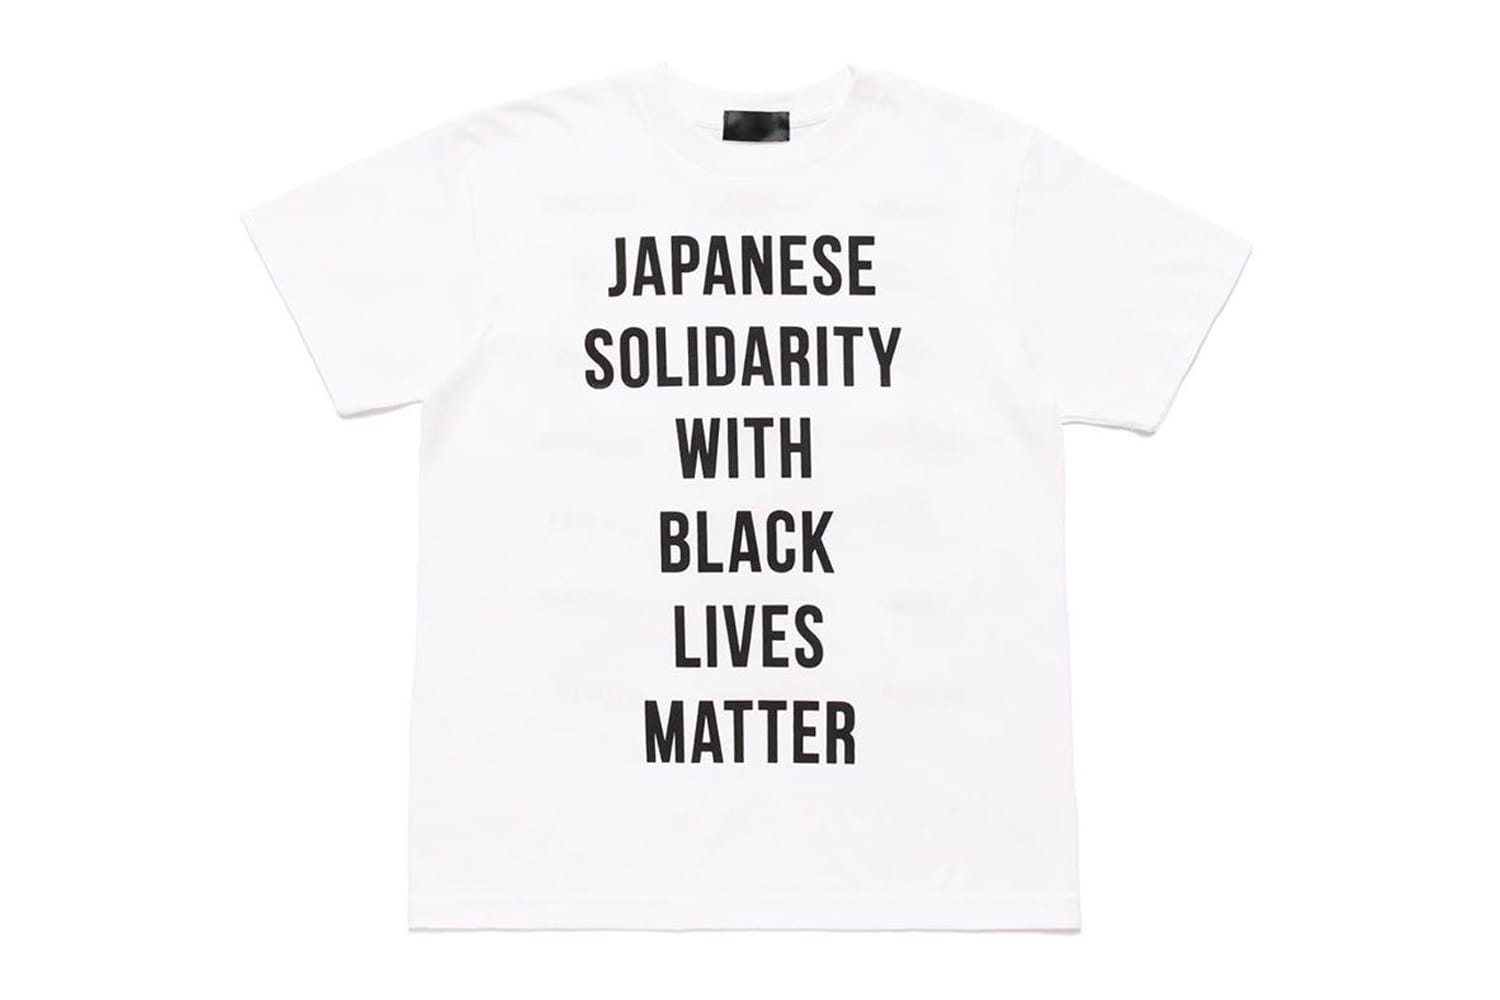 JAPANESE SOLIDARITY WITH BLACK LIVES MATTER